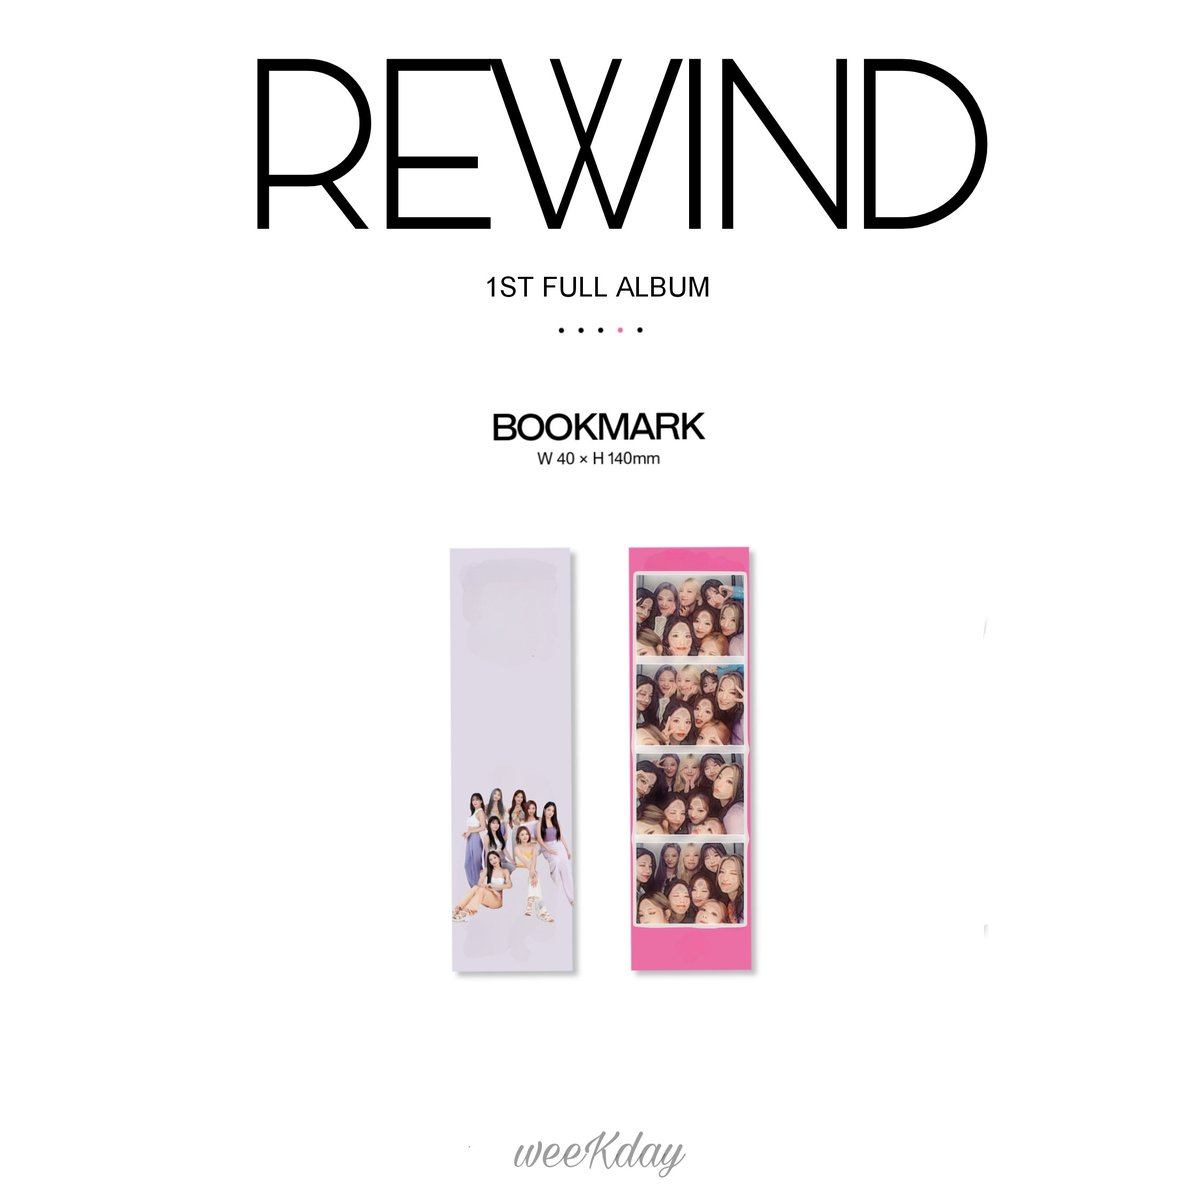 ⏪ weeKday ⏪

The First Full Album - Rewind
Album Details

🖇 forms.gle/V32eAHZsApmYBo…

#weeKday #요일 #weeKdayREWIND #요일REWIND #REWIND #albumdetails #albumpreview